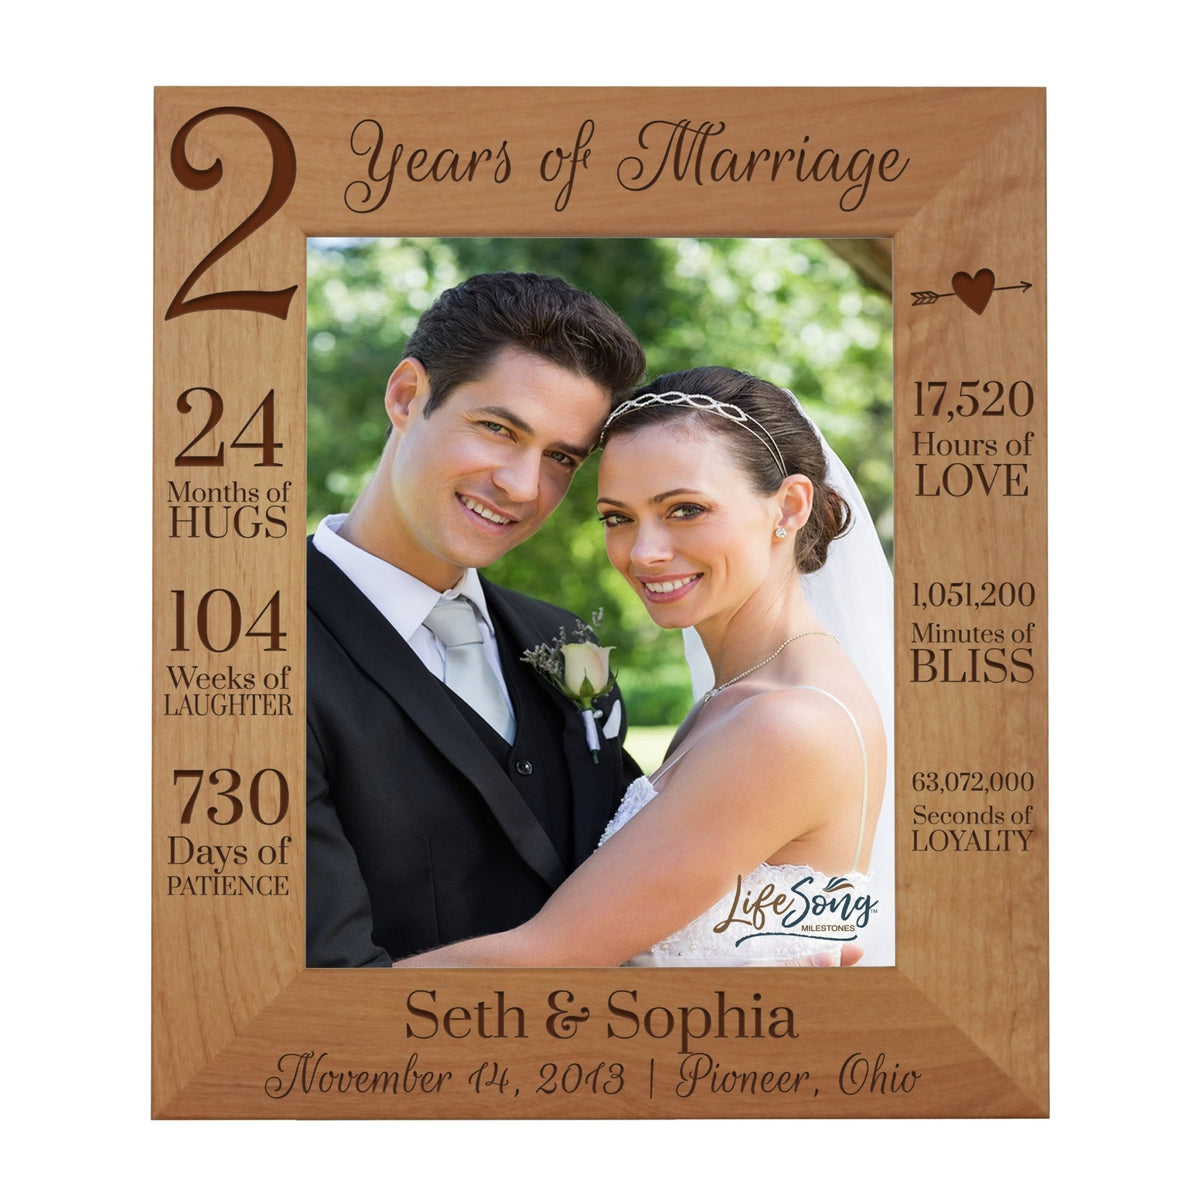 Personalized Engraved 2nd Anniversary Photo Frame - 11.5 x 13.5 - LifeSong Milestones